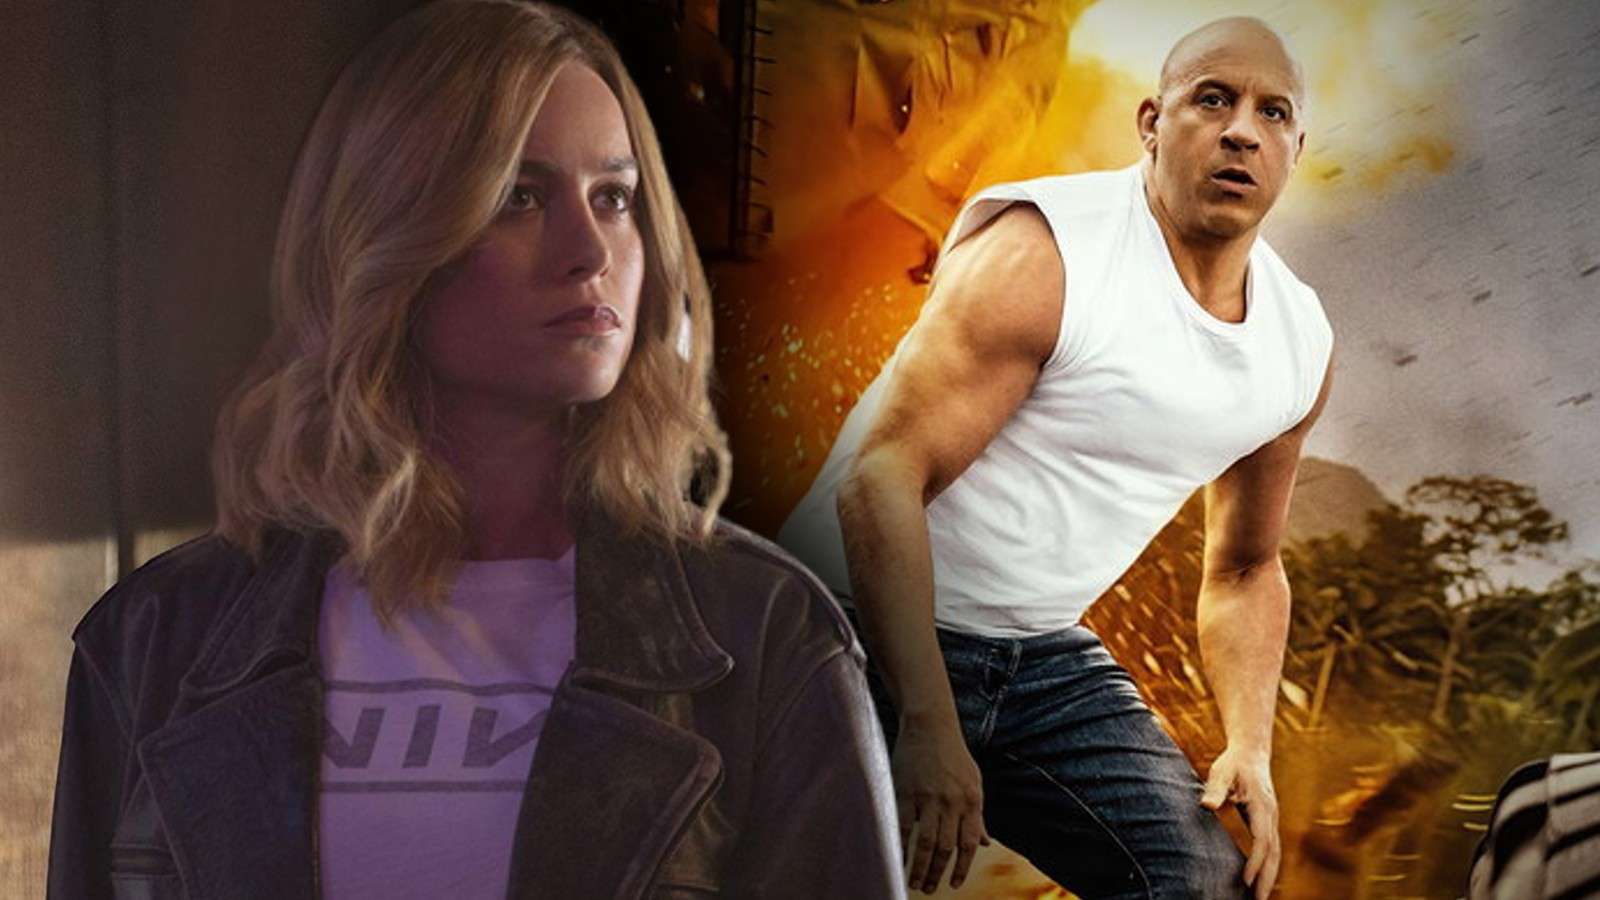 Brie Larson and Vin Diesel in a Fast and Furious poster